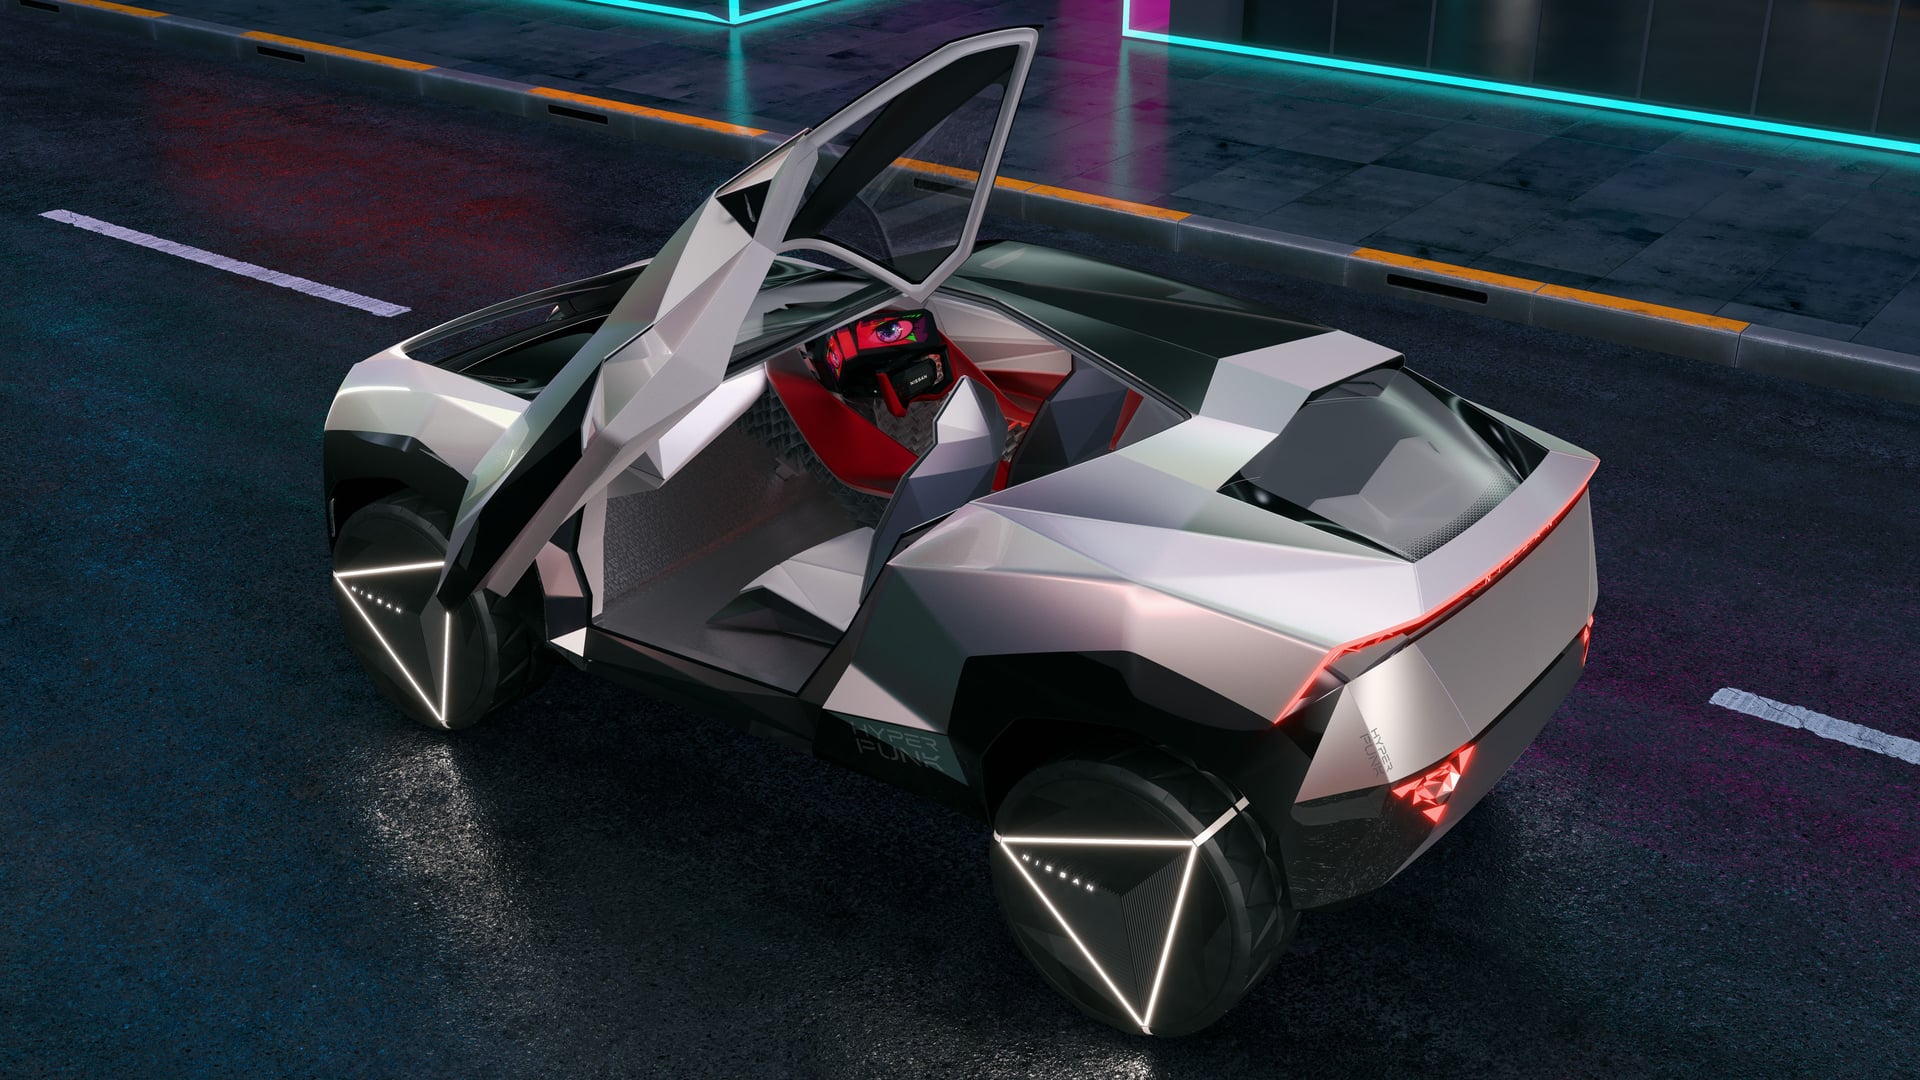 nissan, nismo, tan chong, hyper punk, tokyo mobility, nissan, ev, electric vehicles, nismo, nissan reveals the hyper punk, a new (concept) crossover